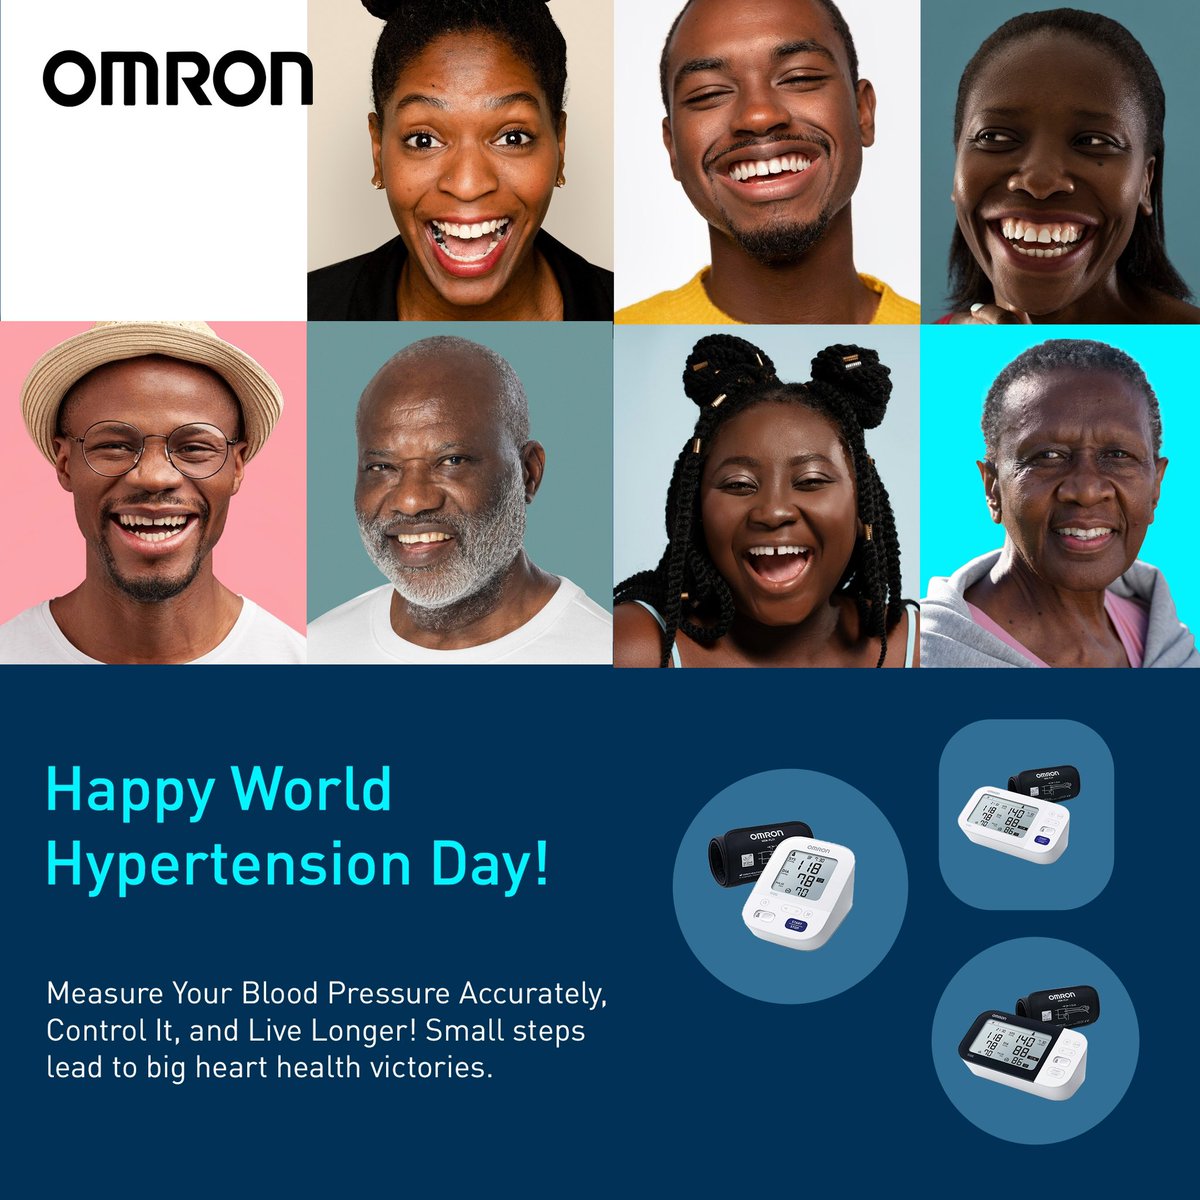 Happy World Hypertension Day! 🌍💓

At OMRON, we believe in the power of small steps leading to big heart health victories. Measure your blood pressure accurately, control it, and live longer. Let’s take charge of our health! 

#WorldHypertensionDay #OmronCaresAboutYourHealth